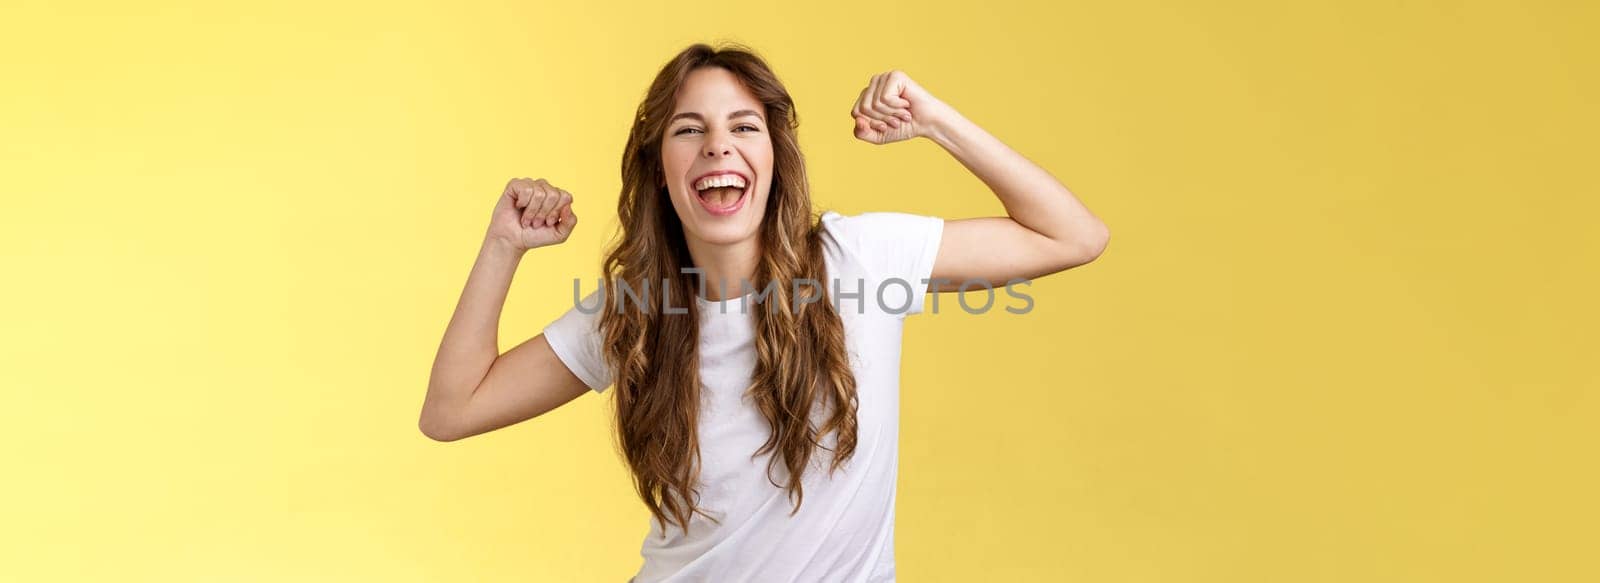 Girl thanks invitation awesome party having fun go wild raise hands up relaxed loose dancing lip sync cool music enjoying moment wear white t-shirt casual outfit celebrating yellow background. Lifestyle.